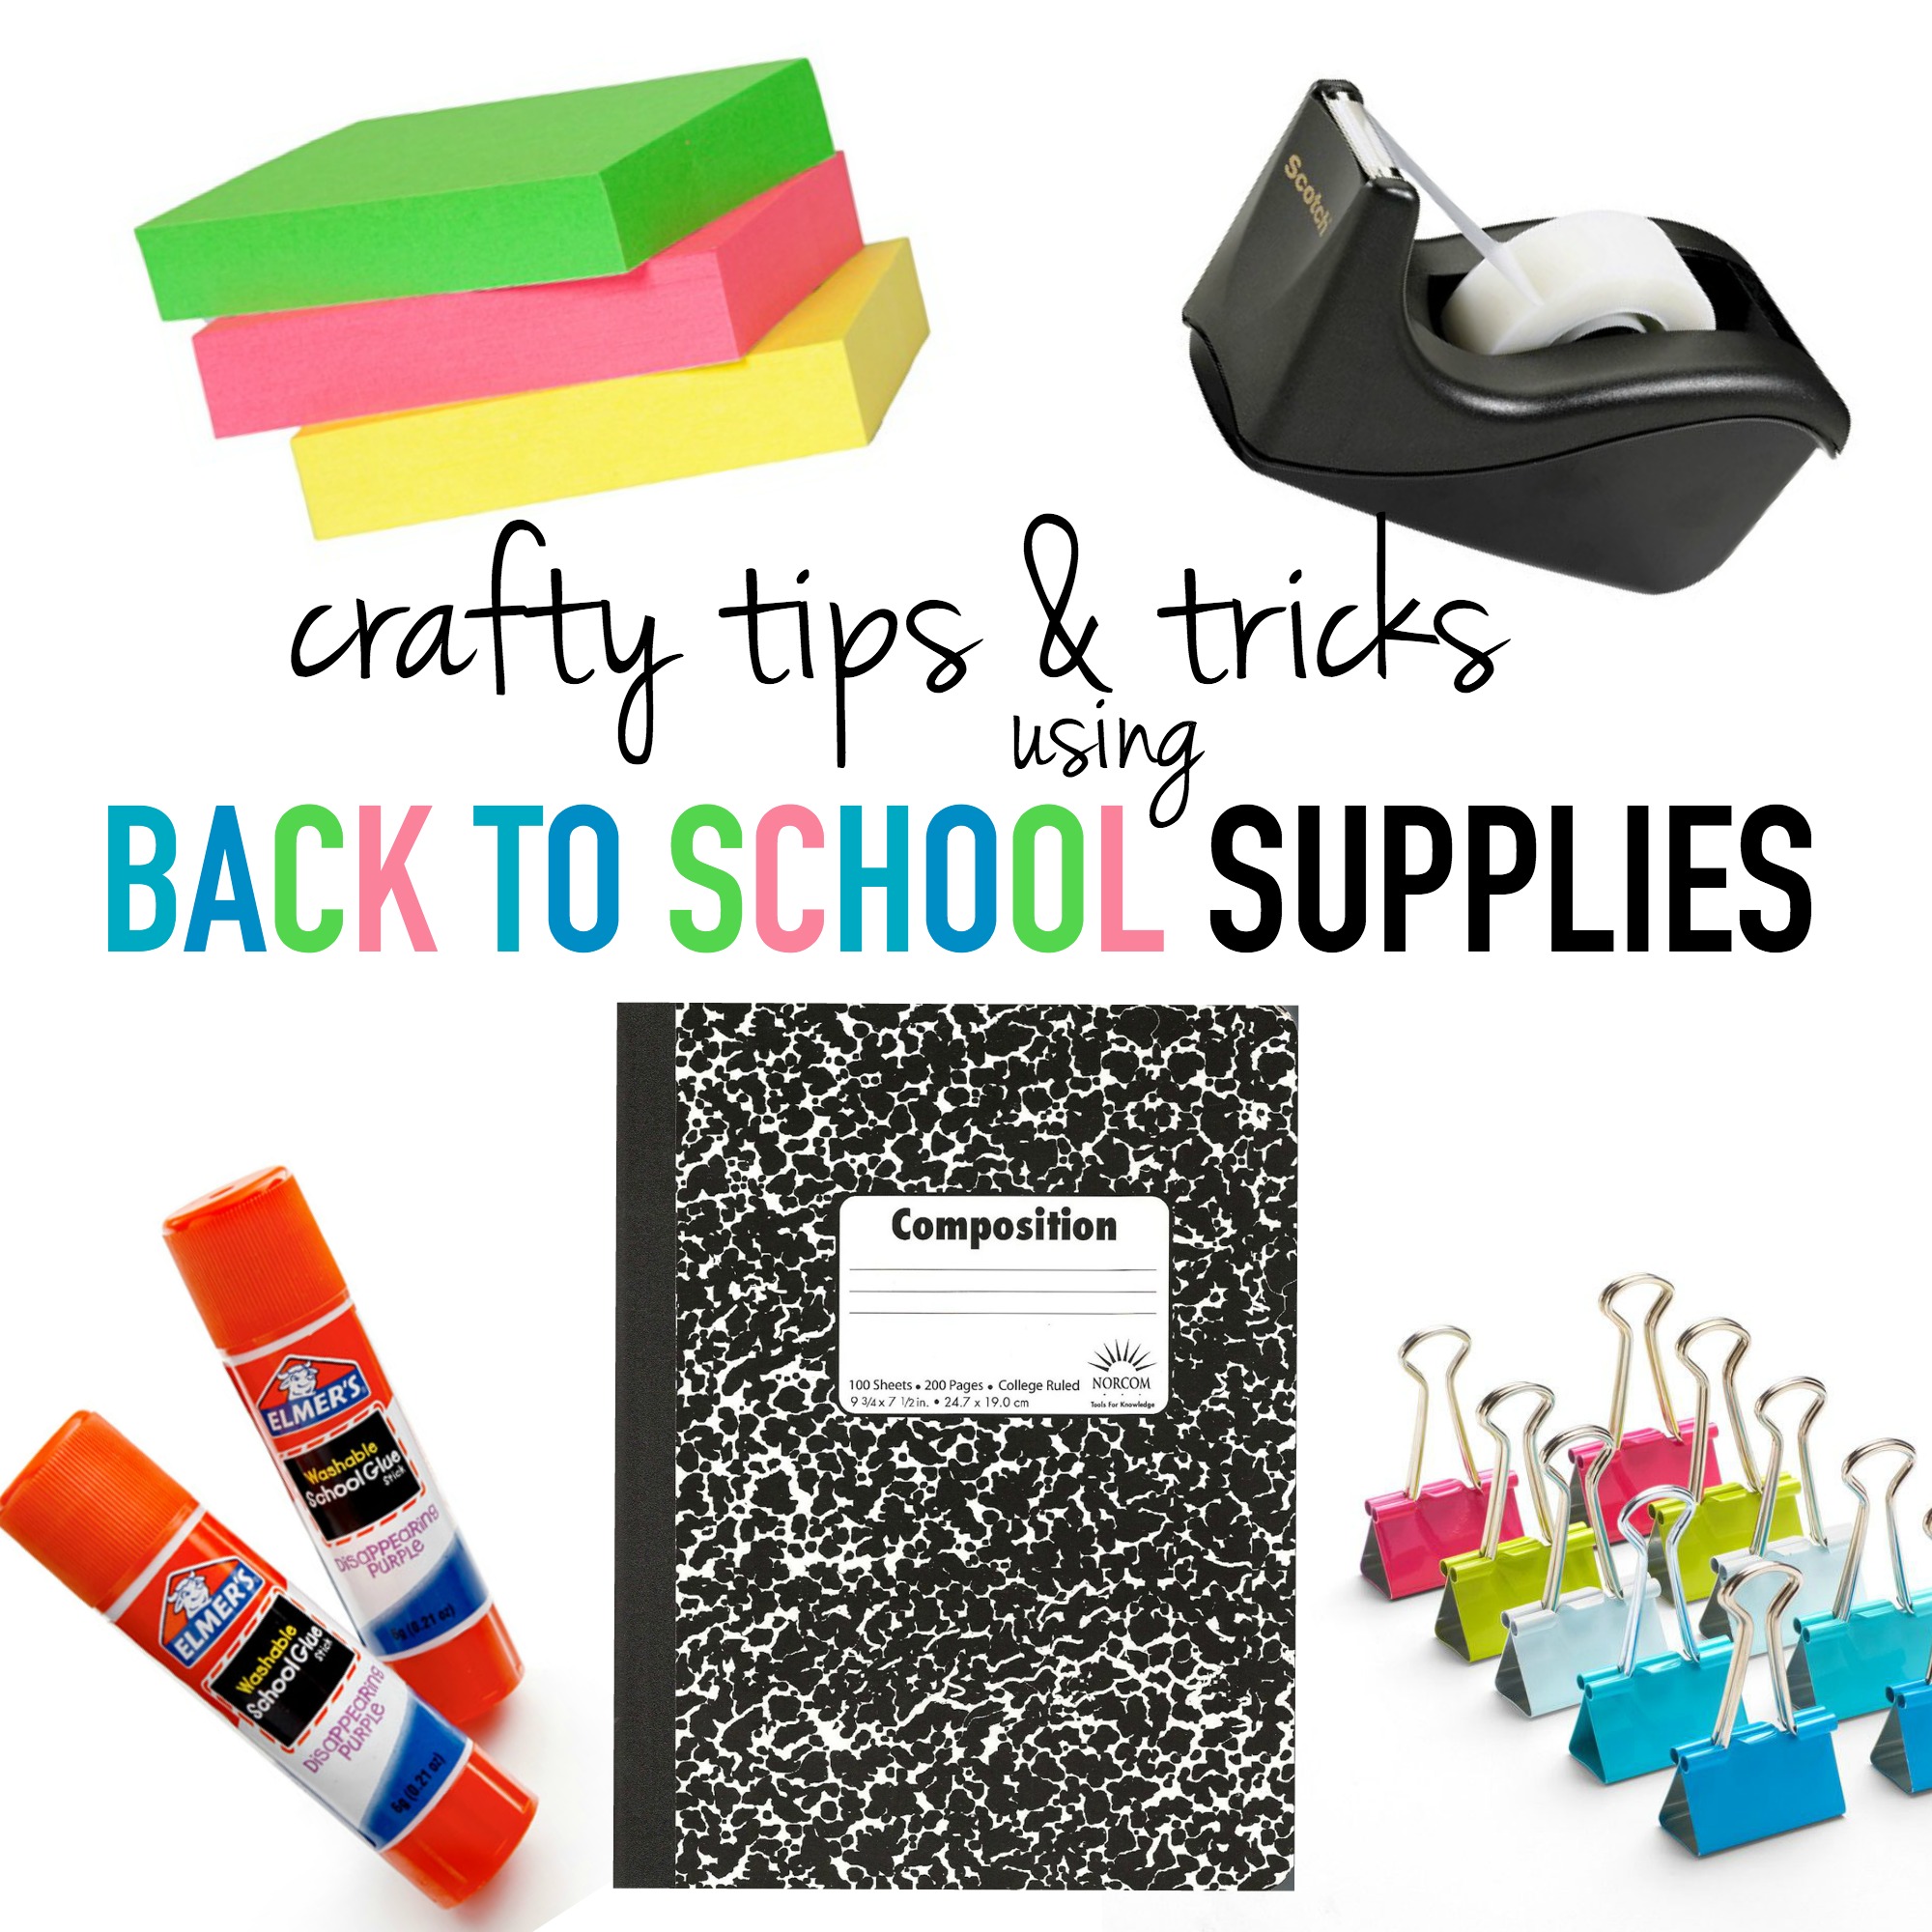 Craft Tips & Tricks Using Back to School Supplies